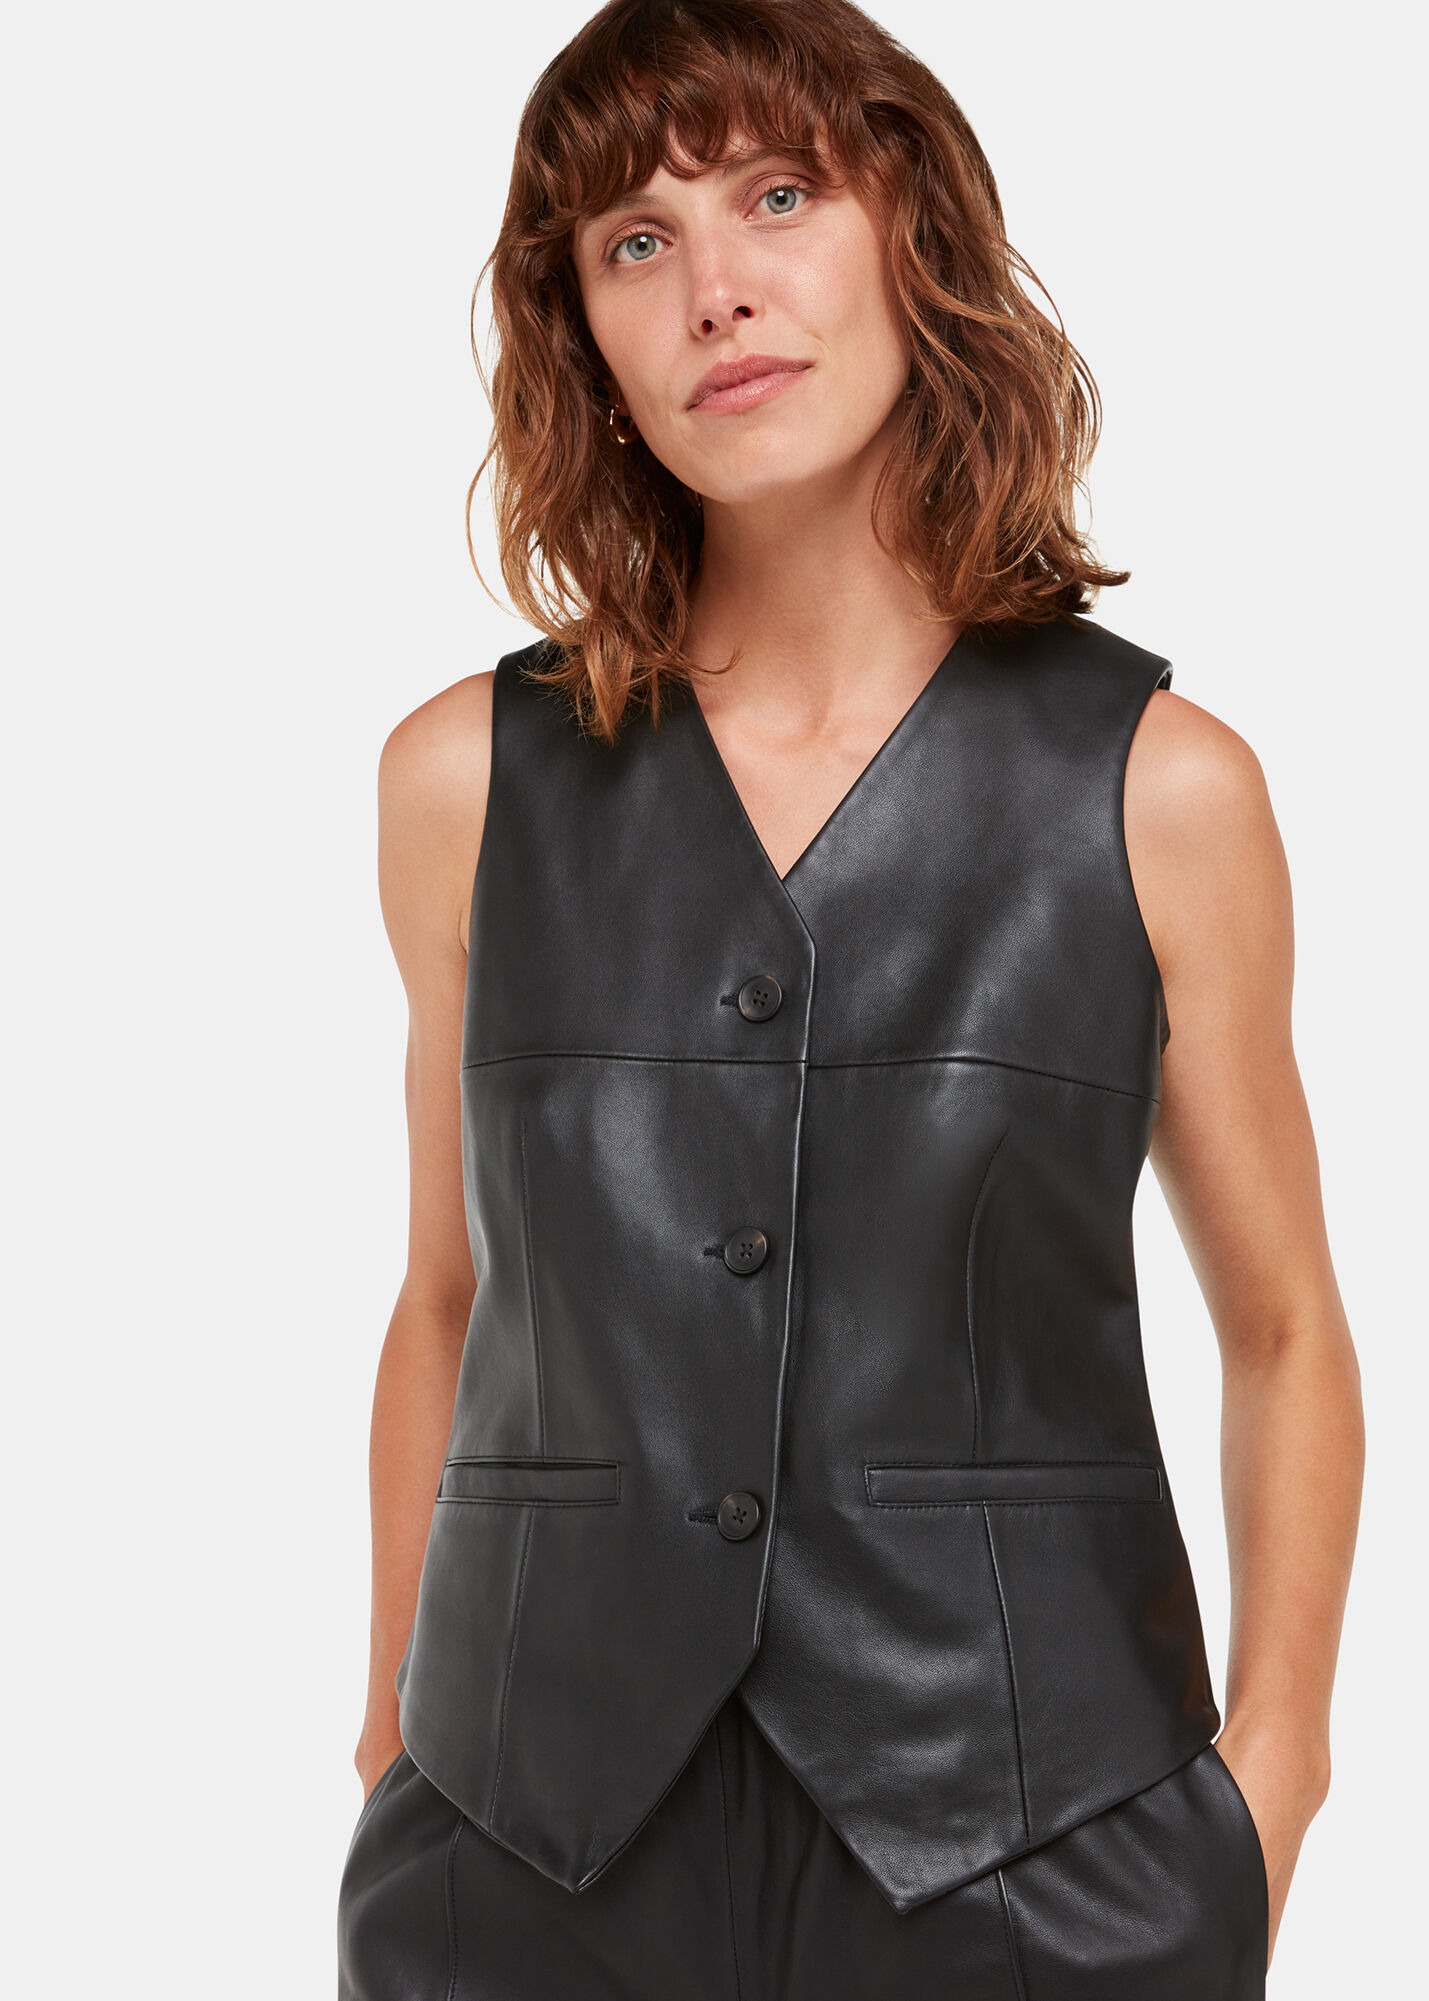 Leather clothing for women | Leather jackets, bags & more | Whistles |